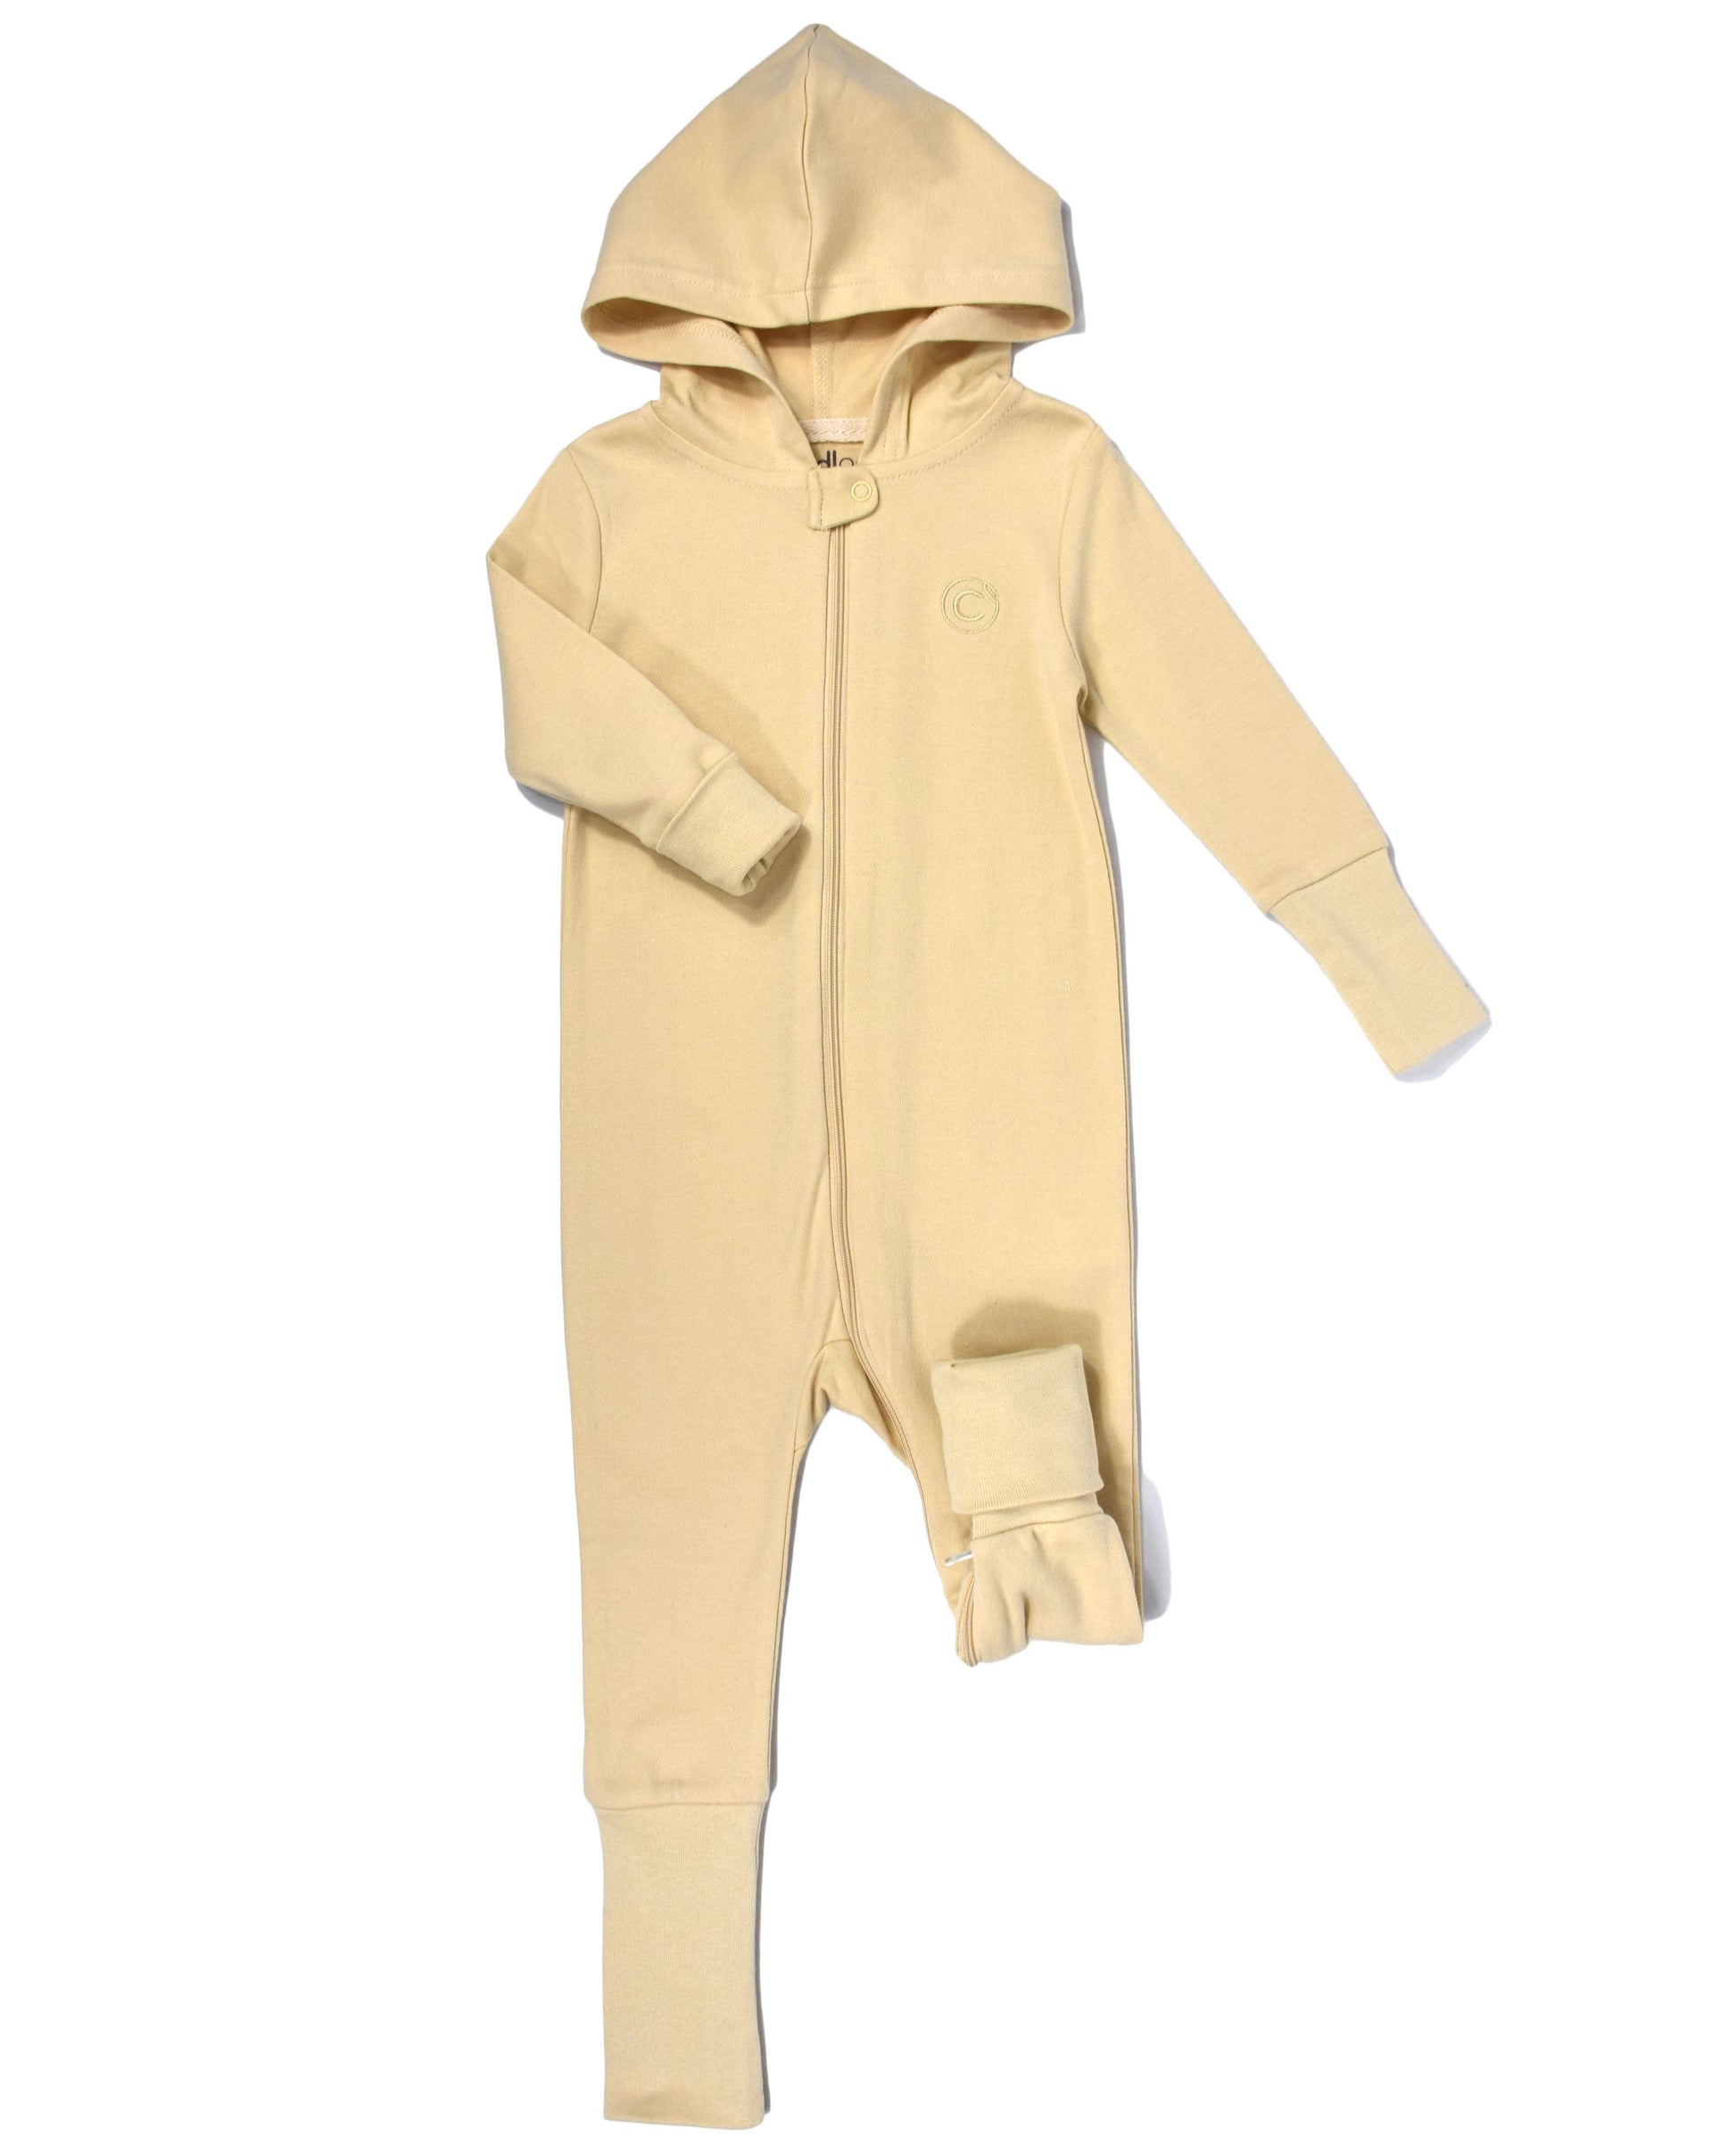 Grow-on Romper with Hood Online